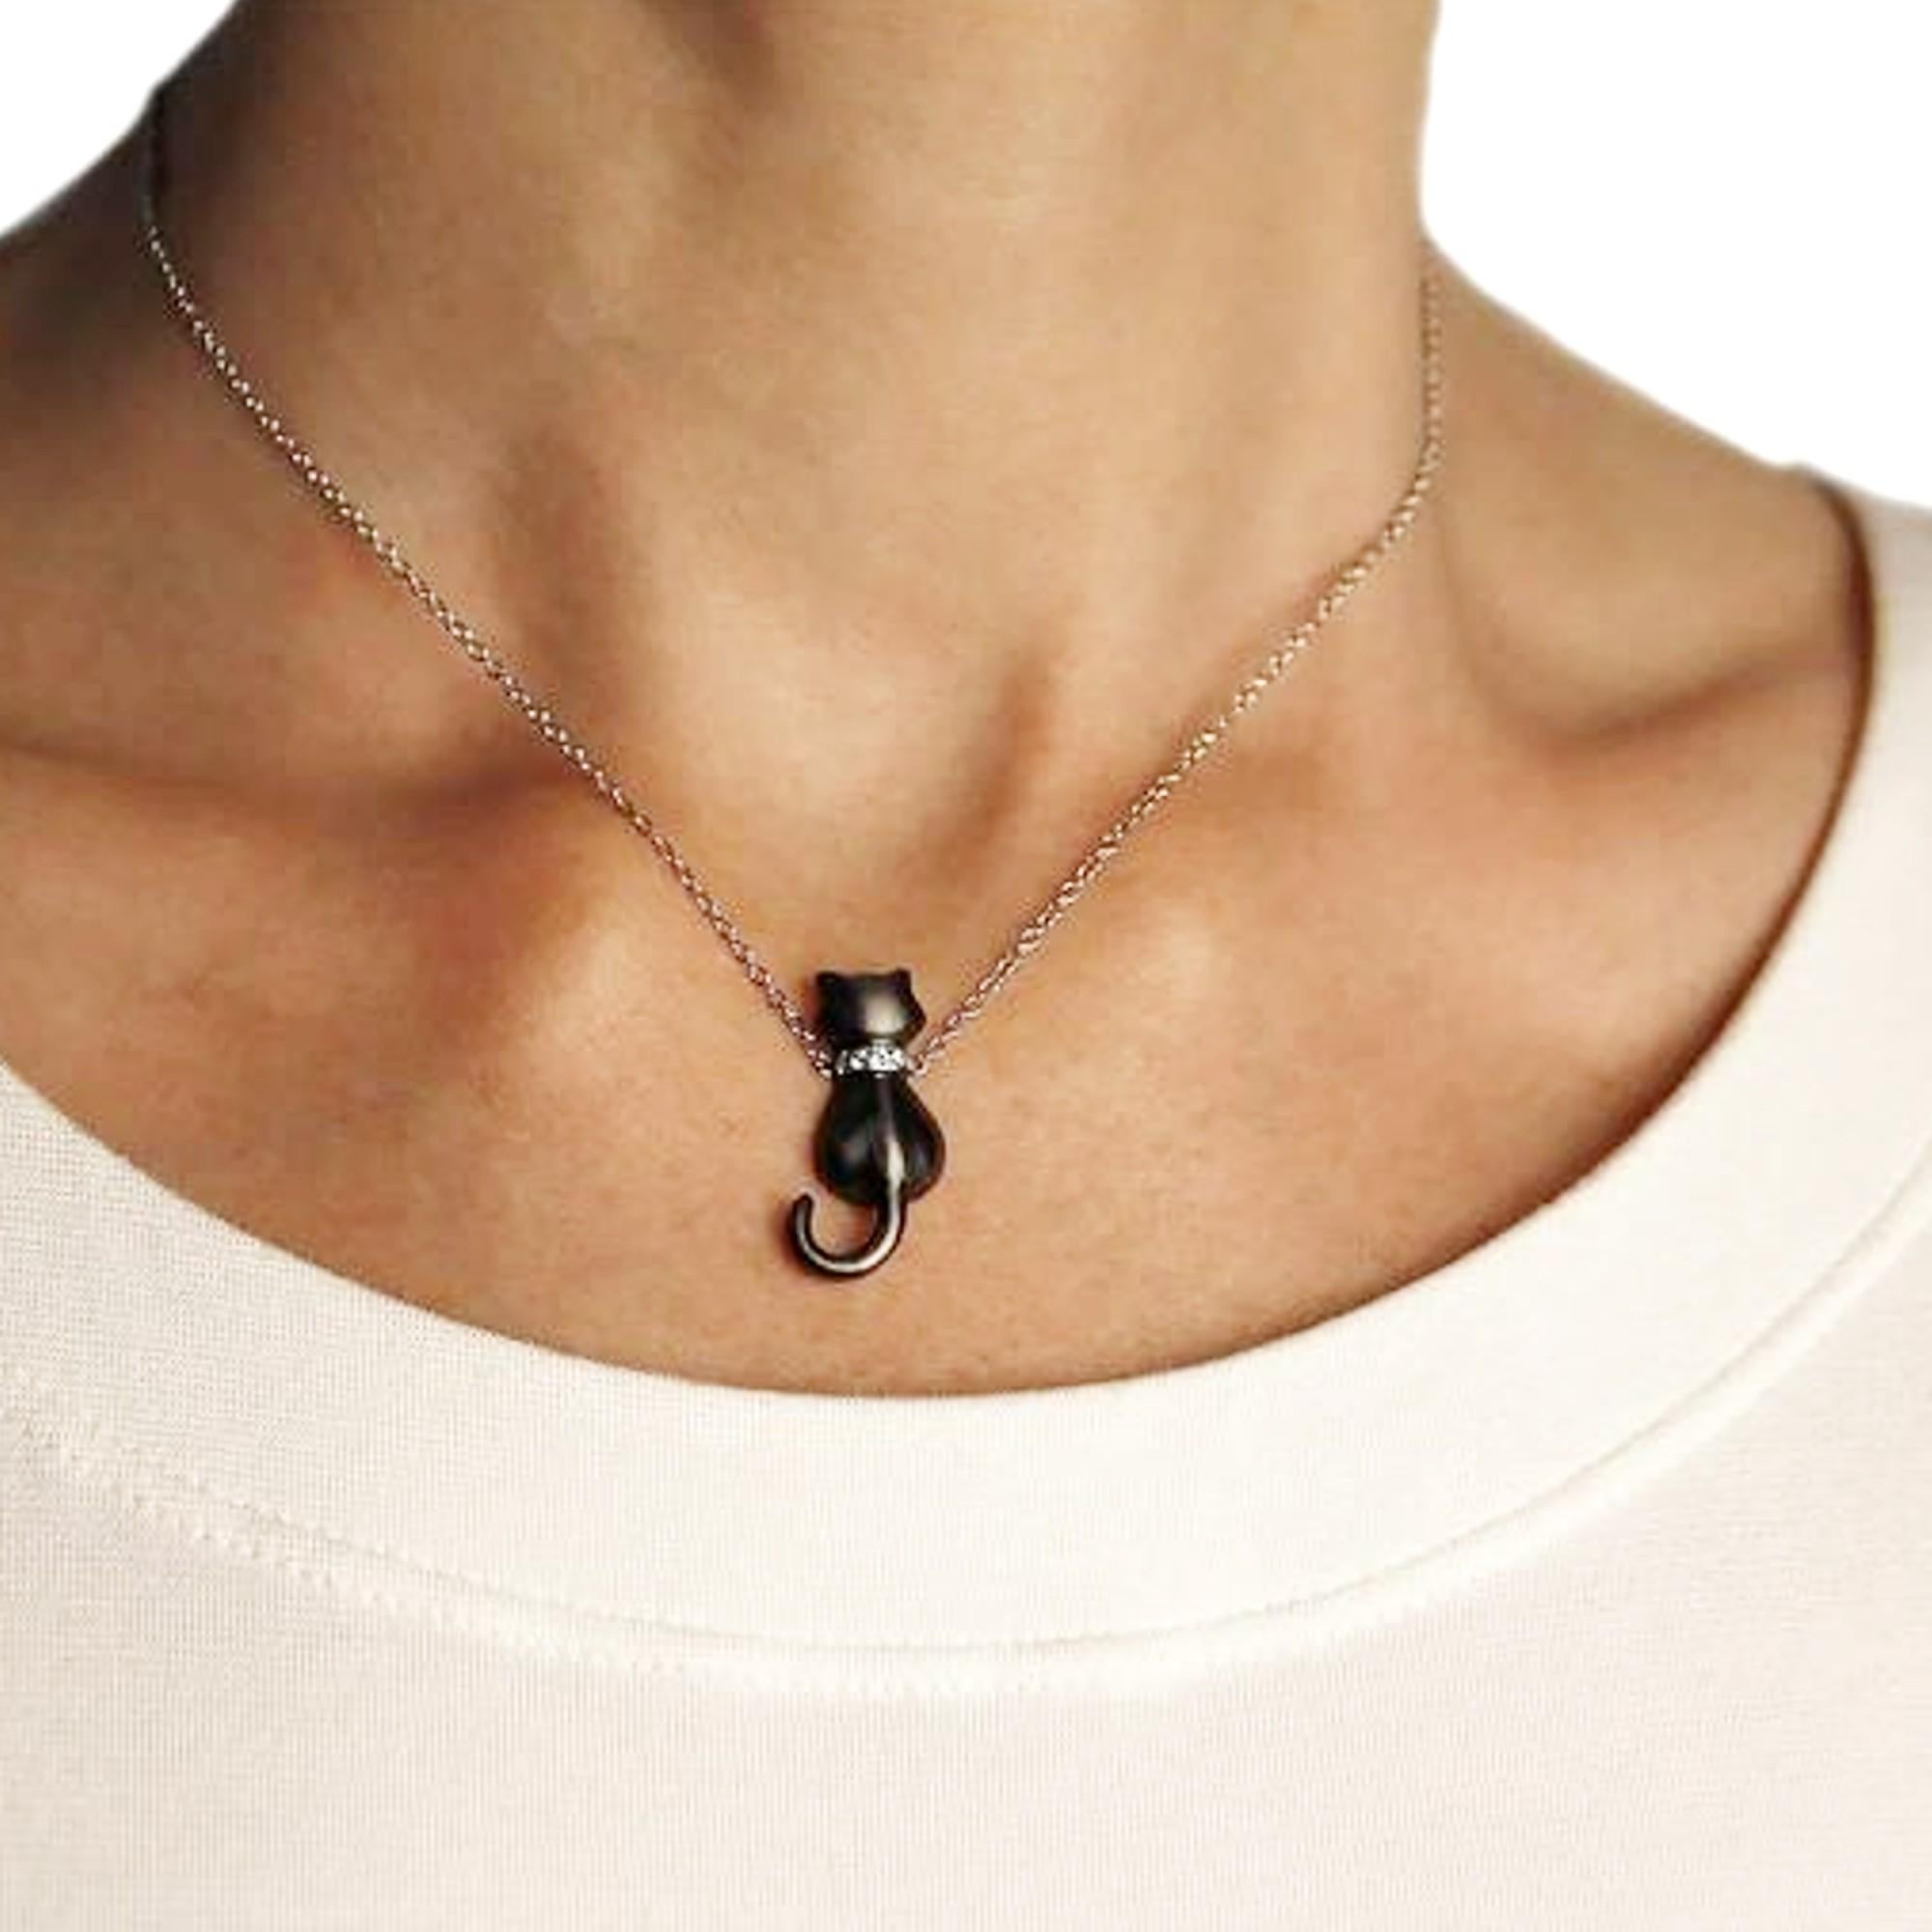 Alex Jona design collection, hand crafted in Italy, black rhodium plated sterling silver cat pendant and chain.
Also available in 18 karat white gold with white diamonds (see edited on 1st dibs).

Alex Jona jewels stand out, not only for their